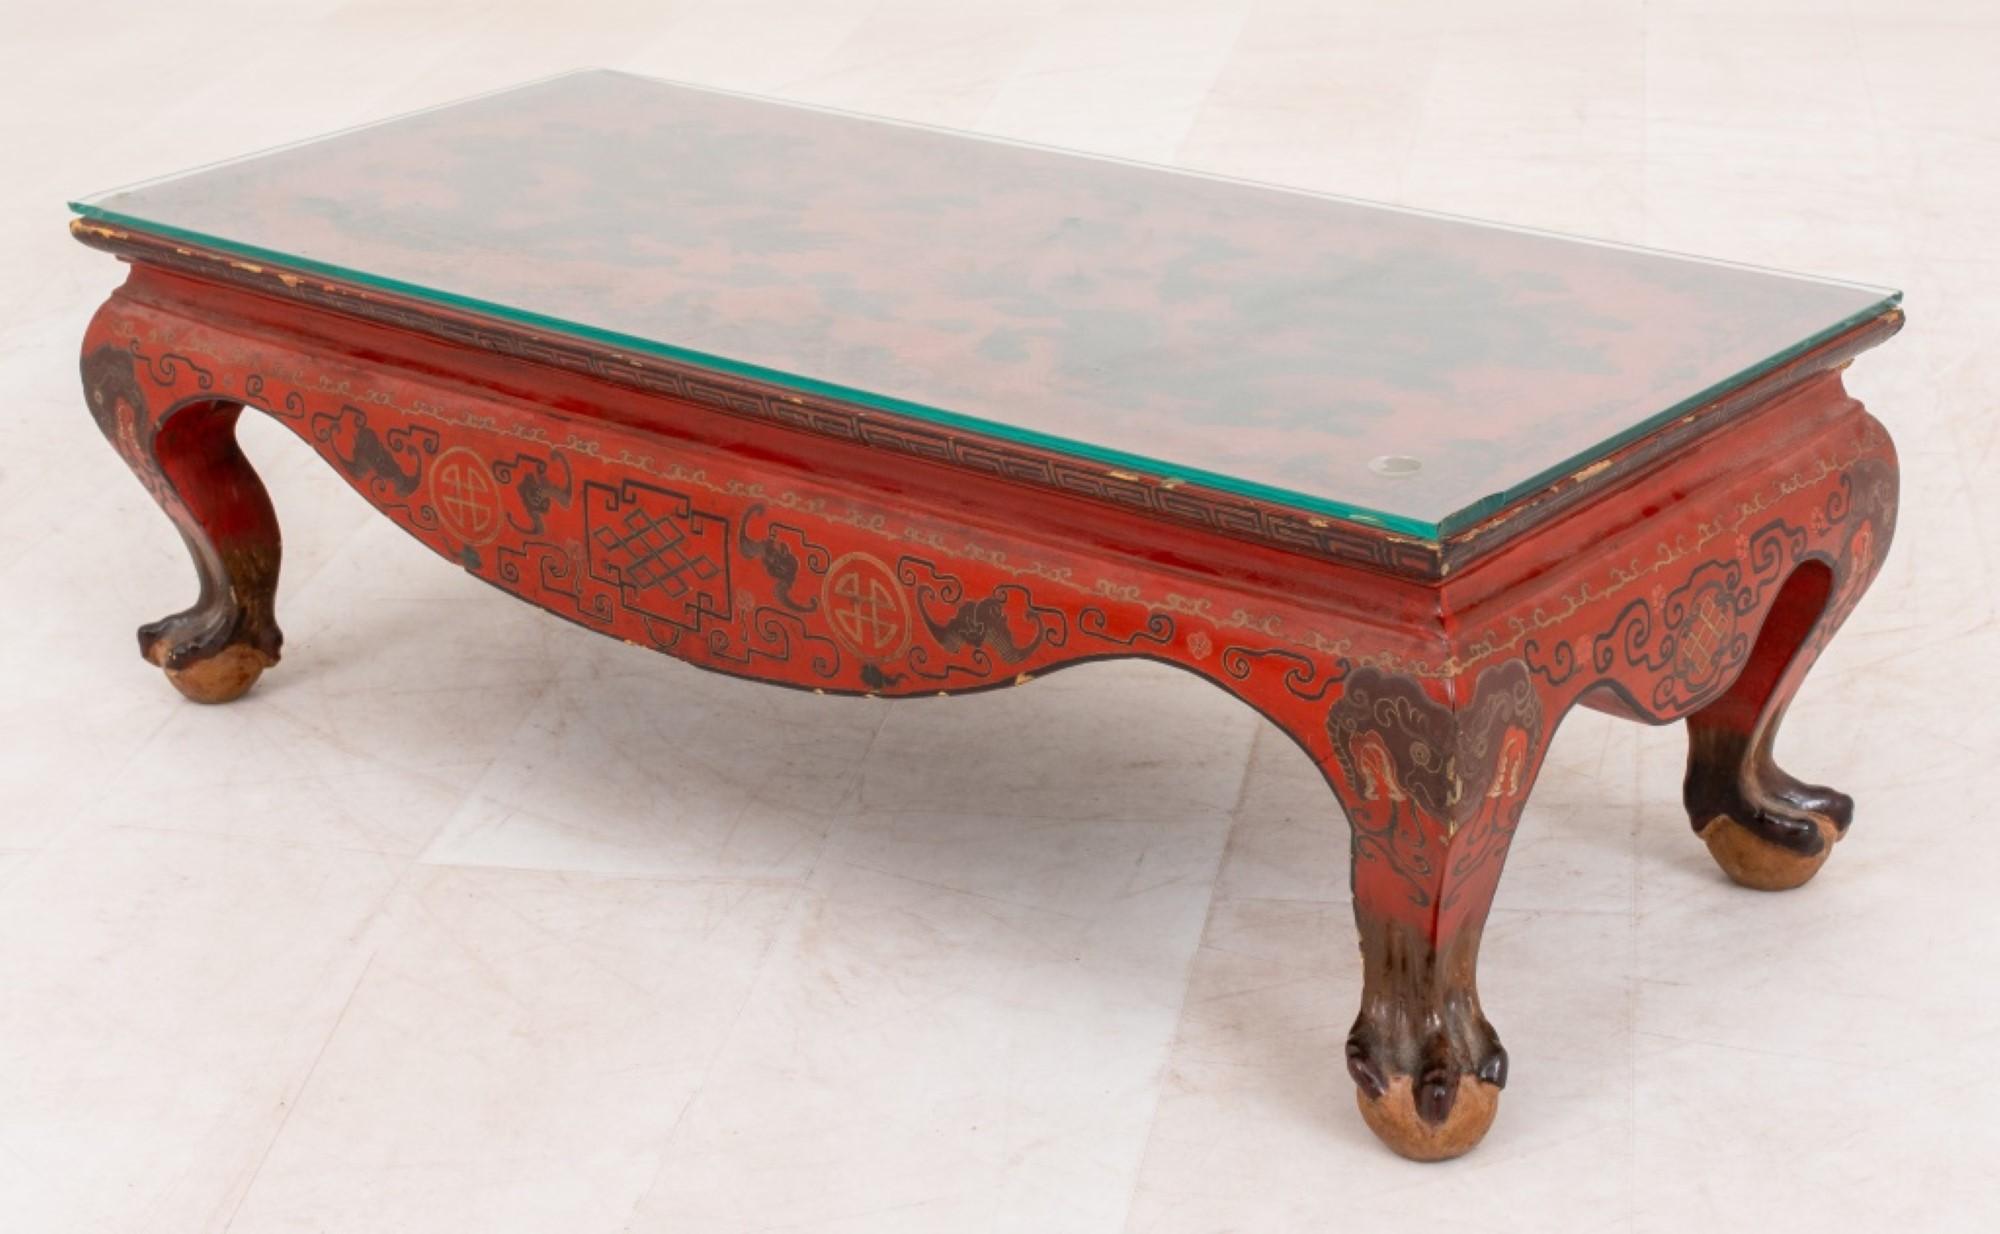 The Chinoiserie manner red lacquered and gilt decorated low table measures approximately 10.5 inches in height, 31.5 inches in length, and 13.5 inches in depth (approximate measurements).




